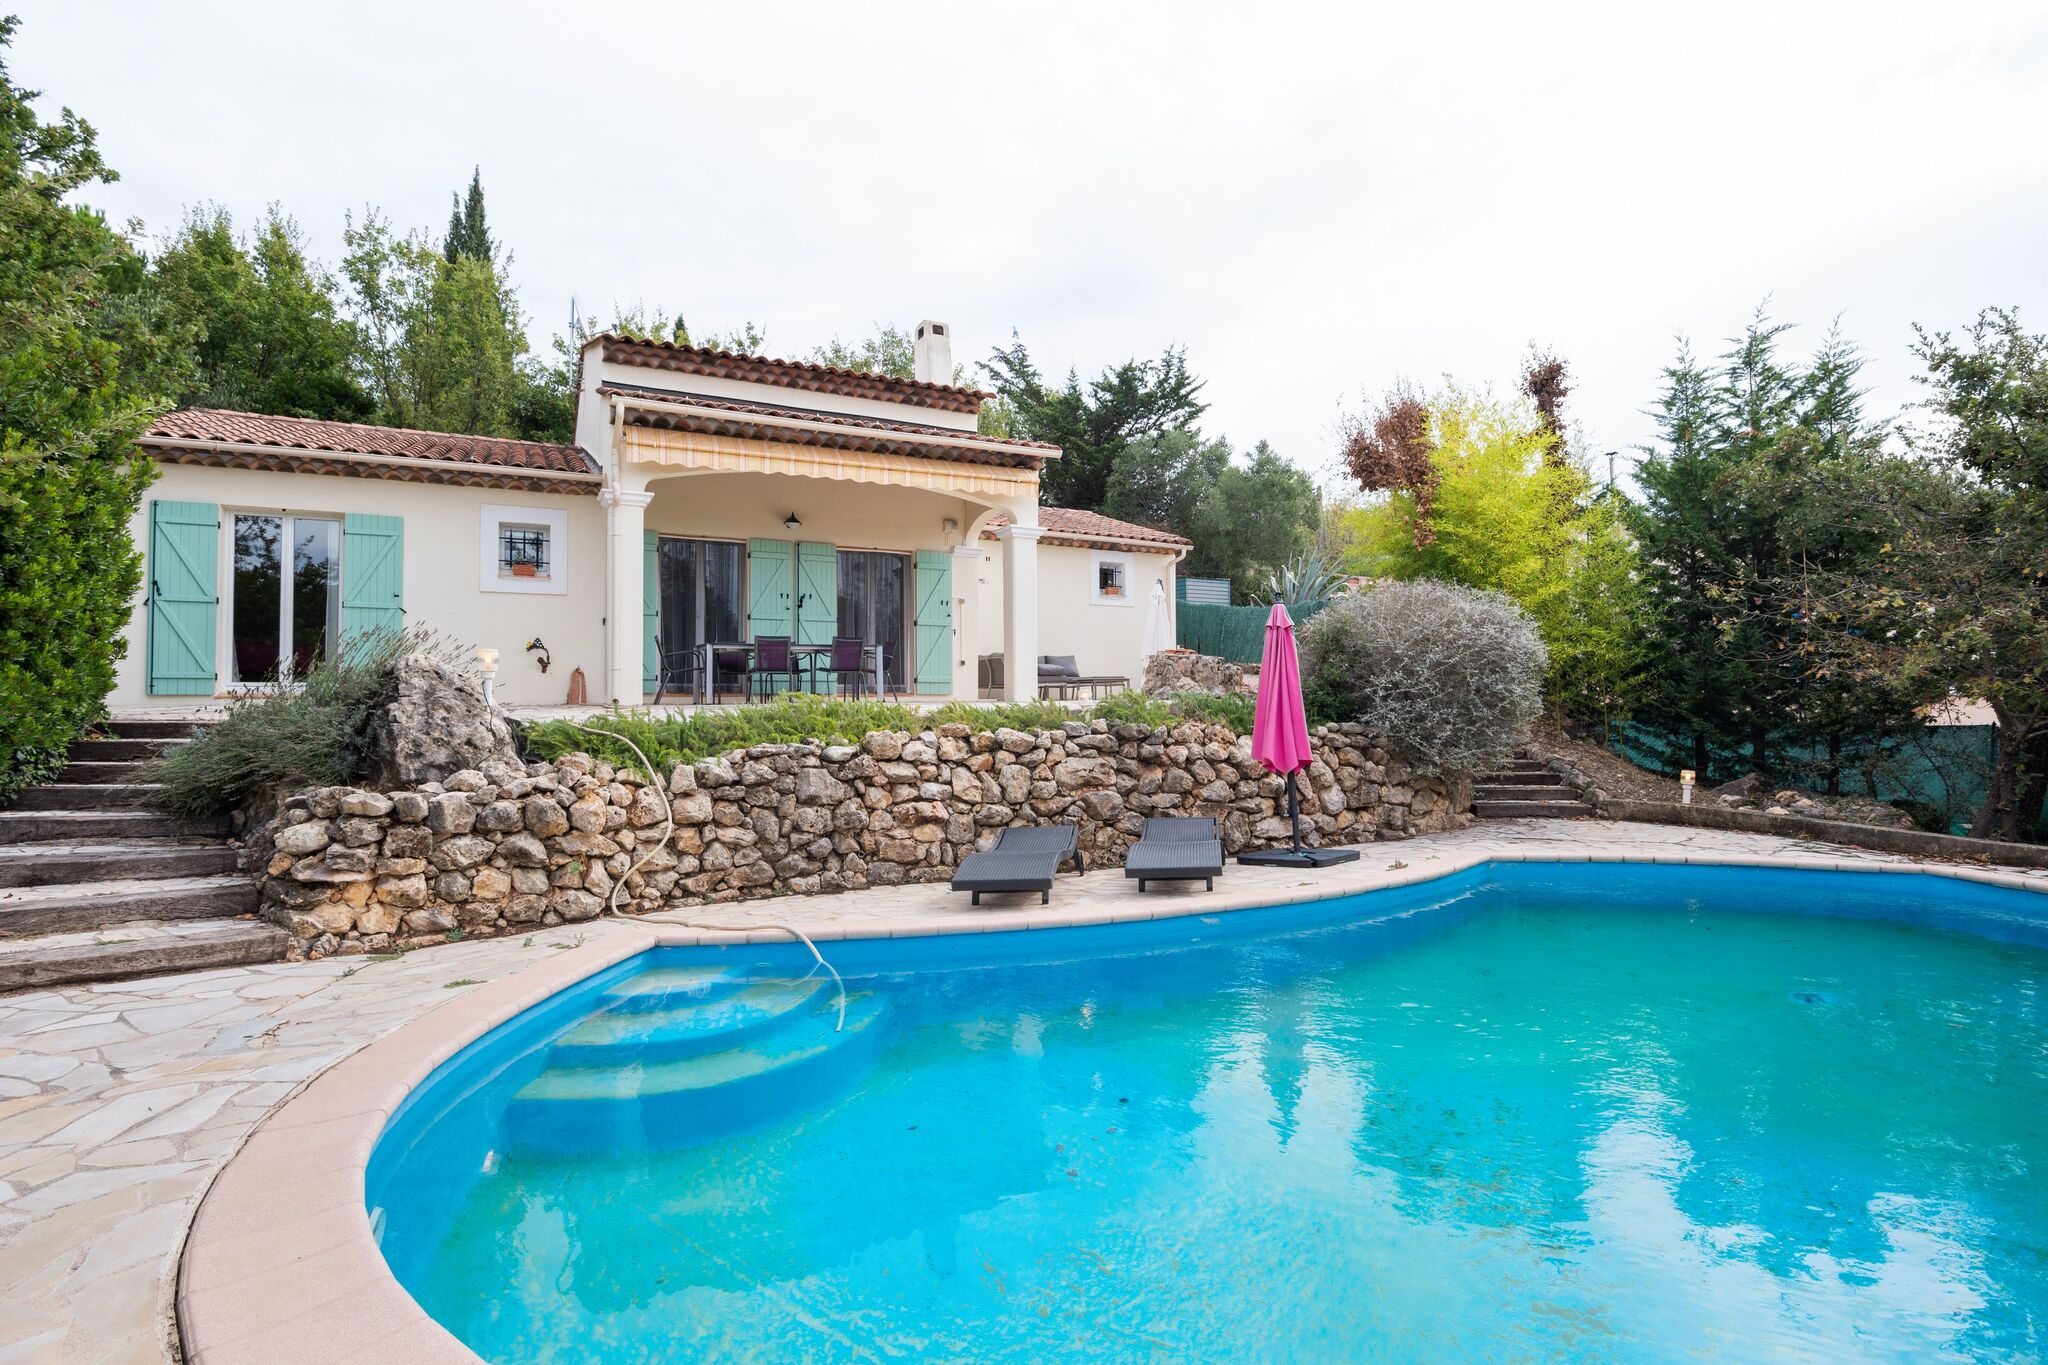 Beautiful villa with a quiet location in the green hinterland of FrÃ©jus